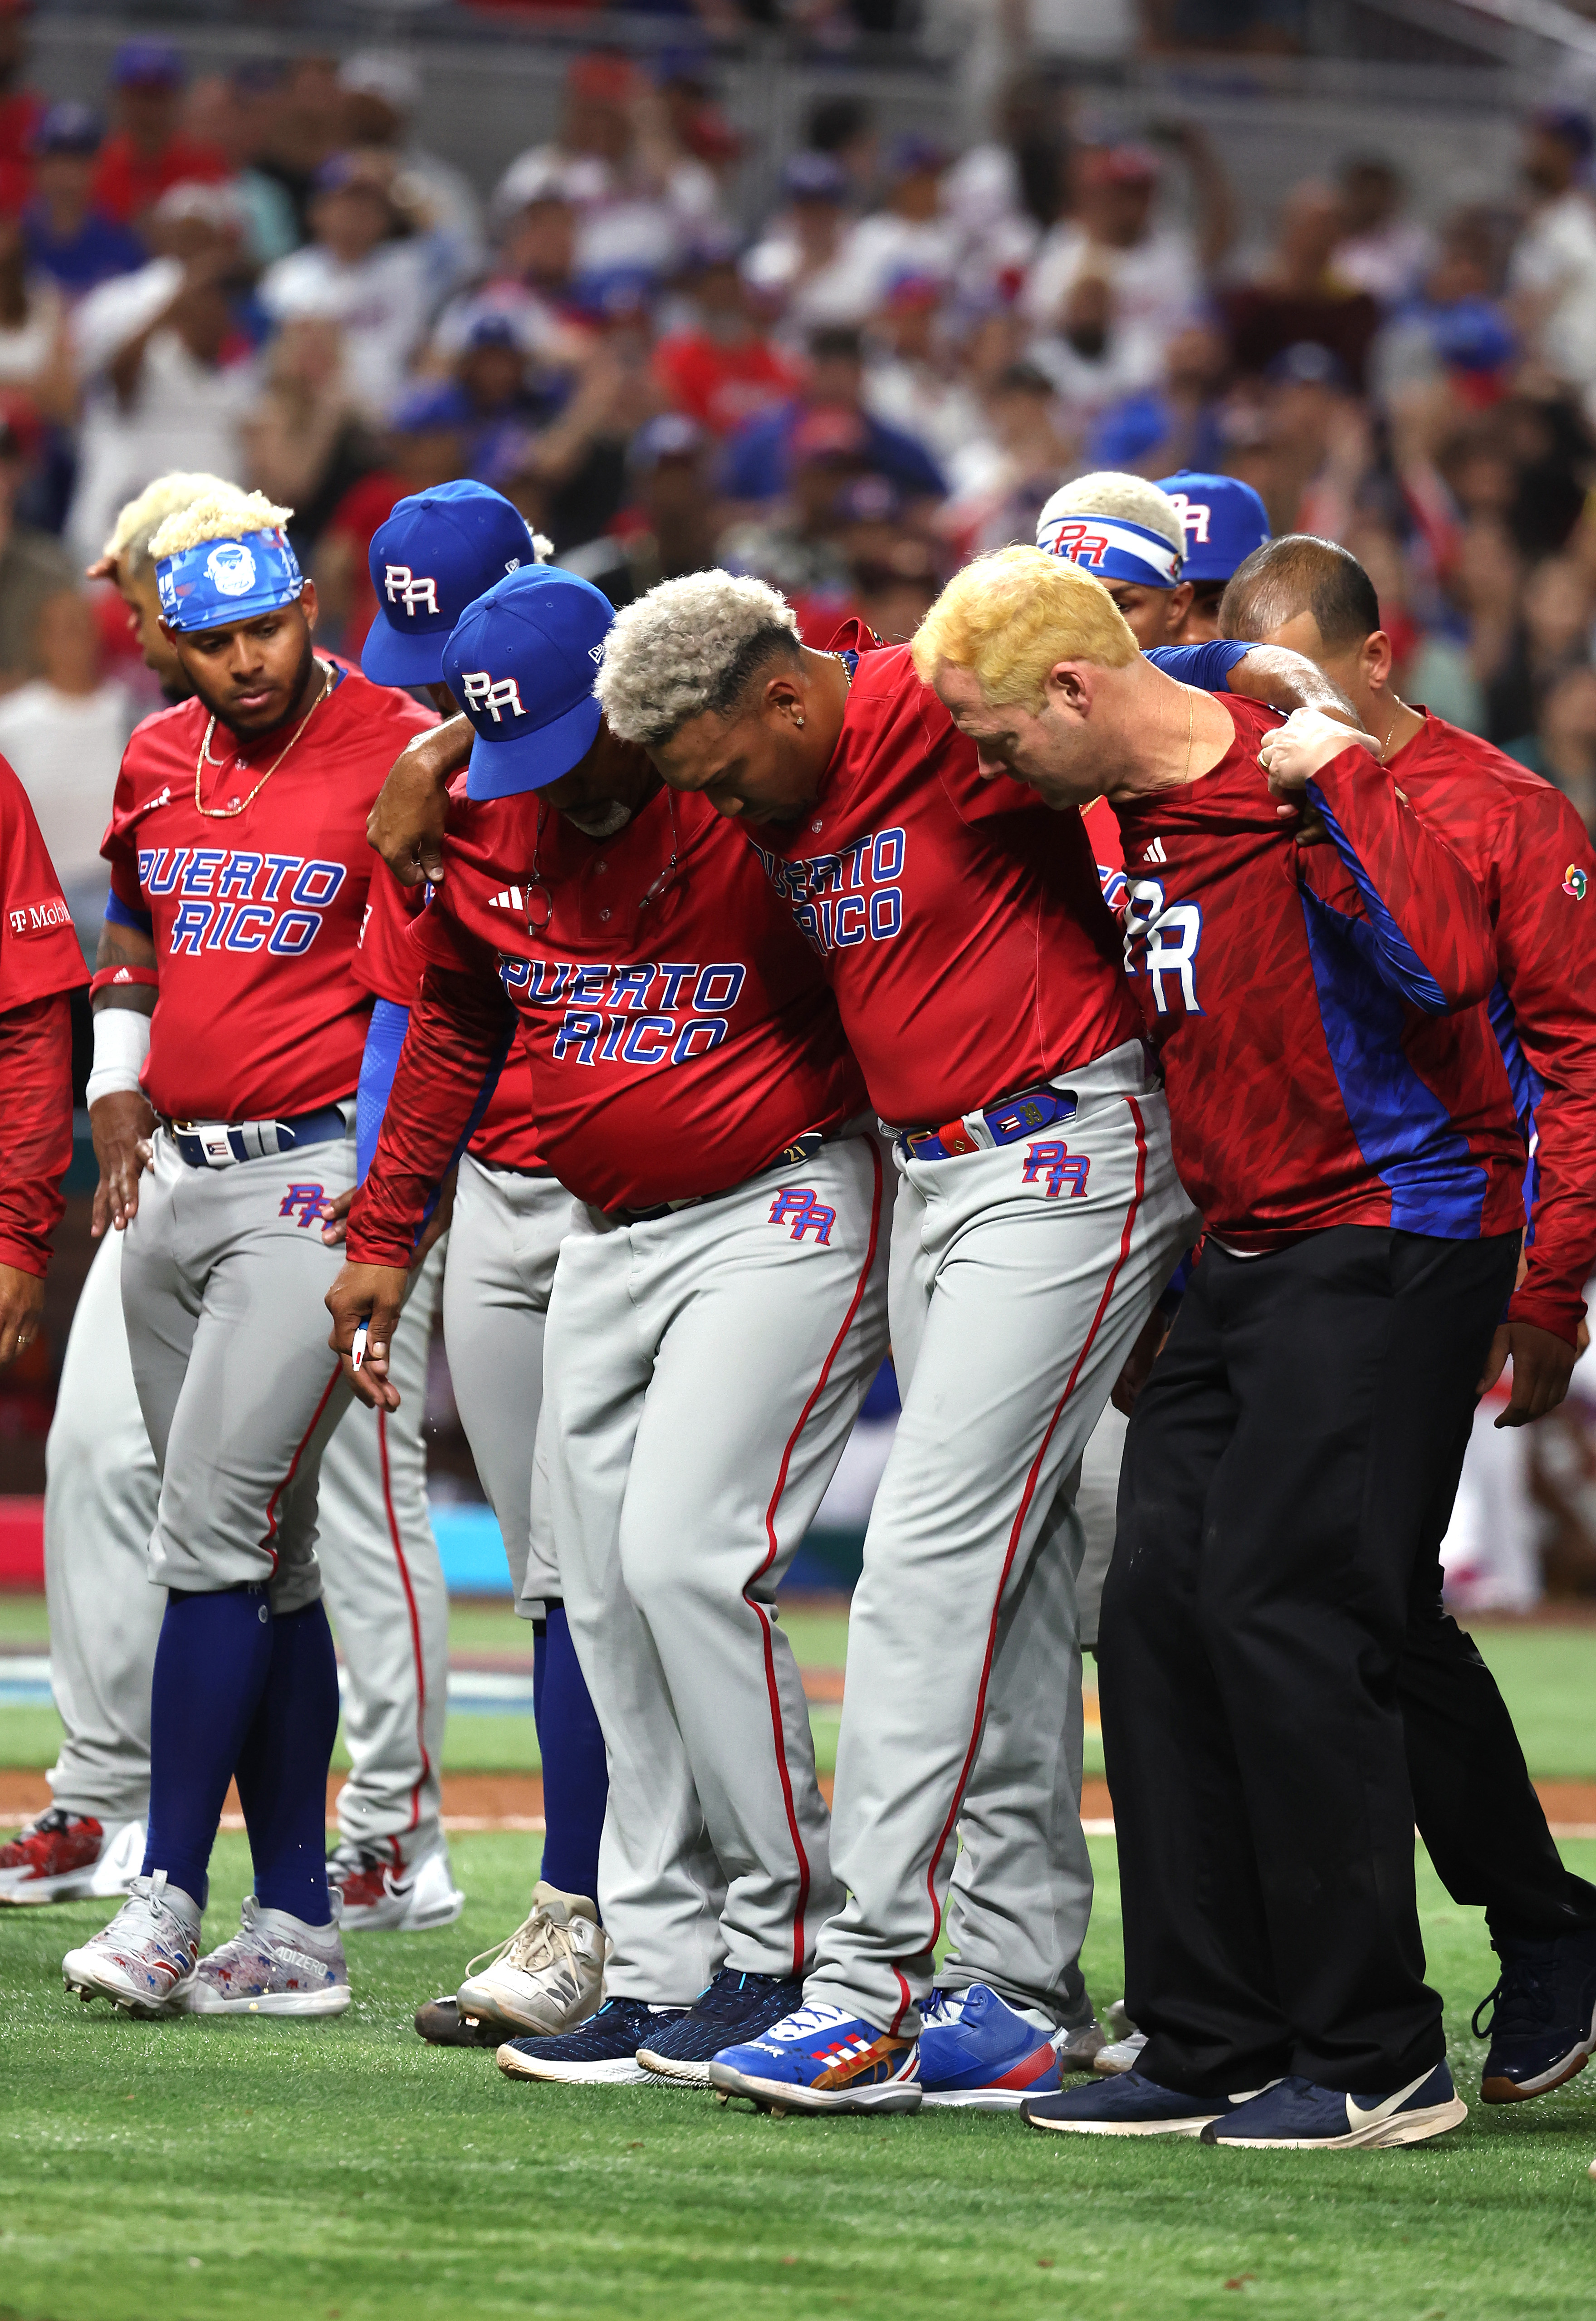 World Baseball Classic adopts MLB rule for extra innings